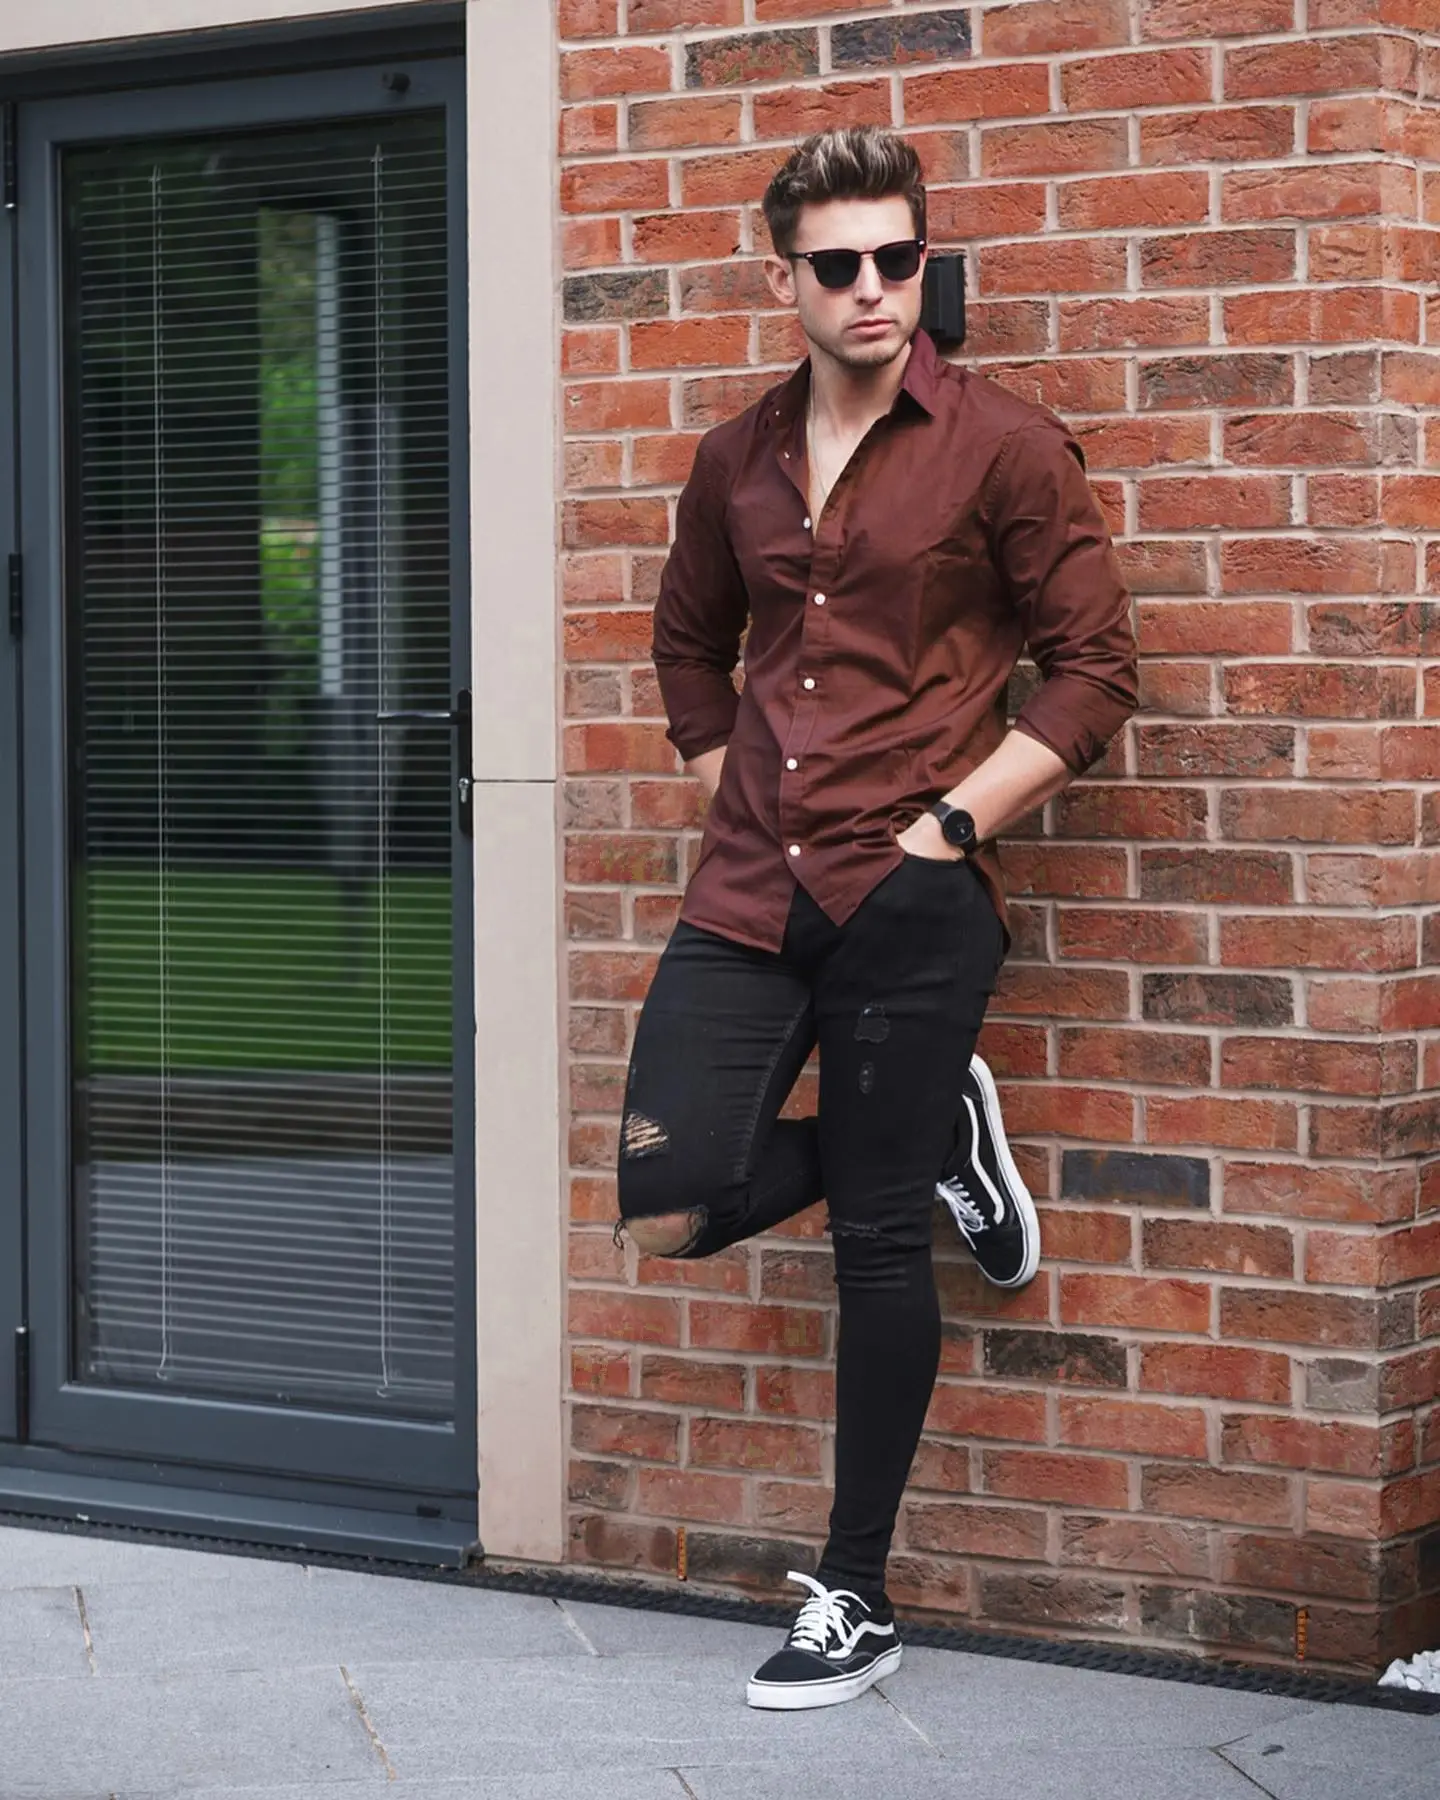 8 Brown pant matching shirt Combinations ideas for men